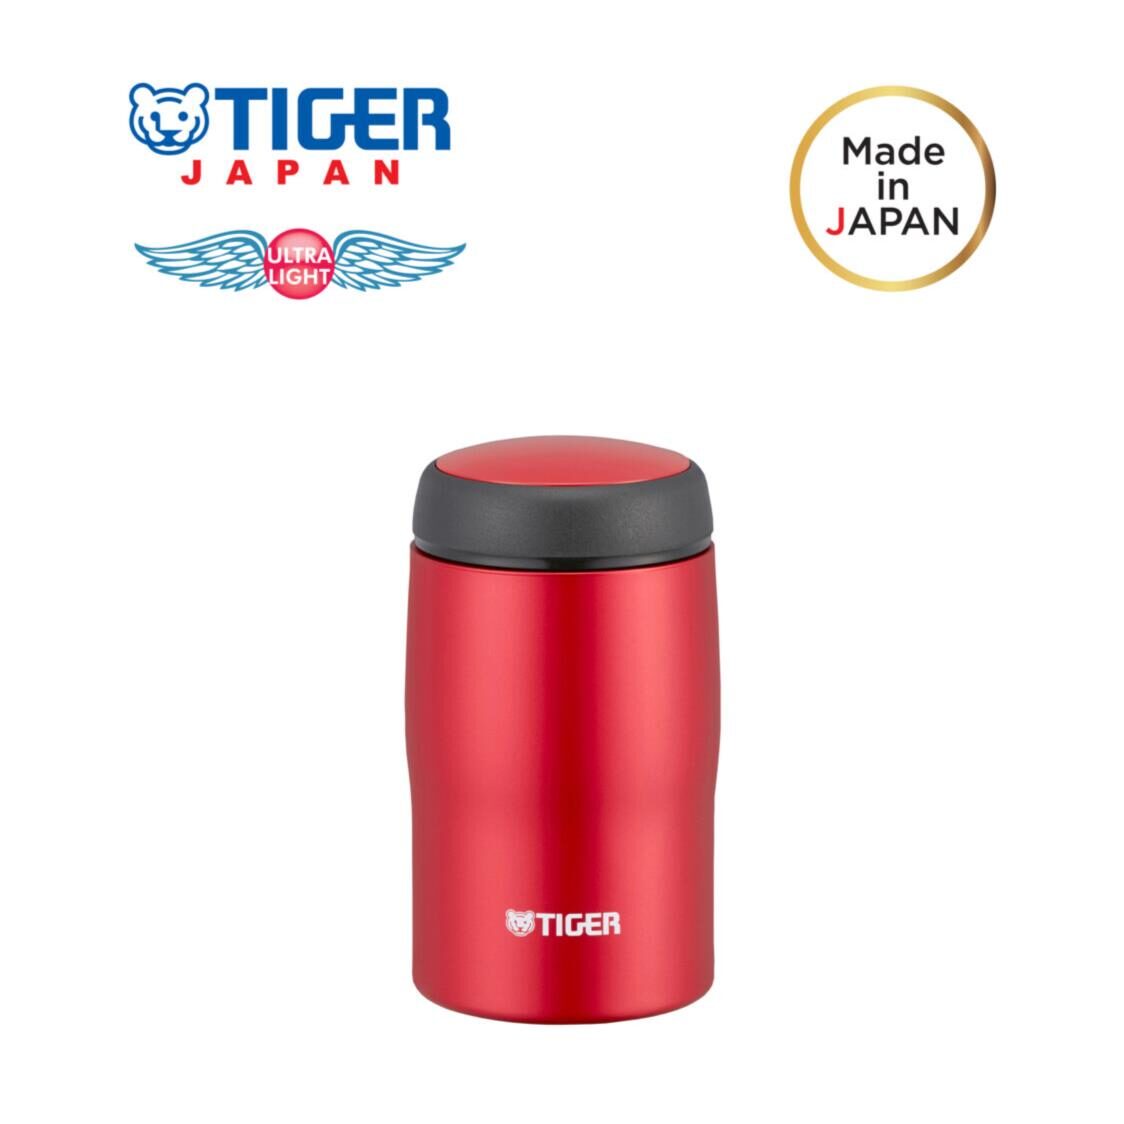 Tiger 240ml Double Stainless Steel Mug - Matte Red Made in Japan MJA-B024 RM